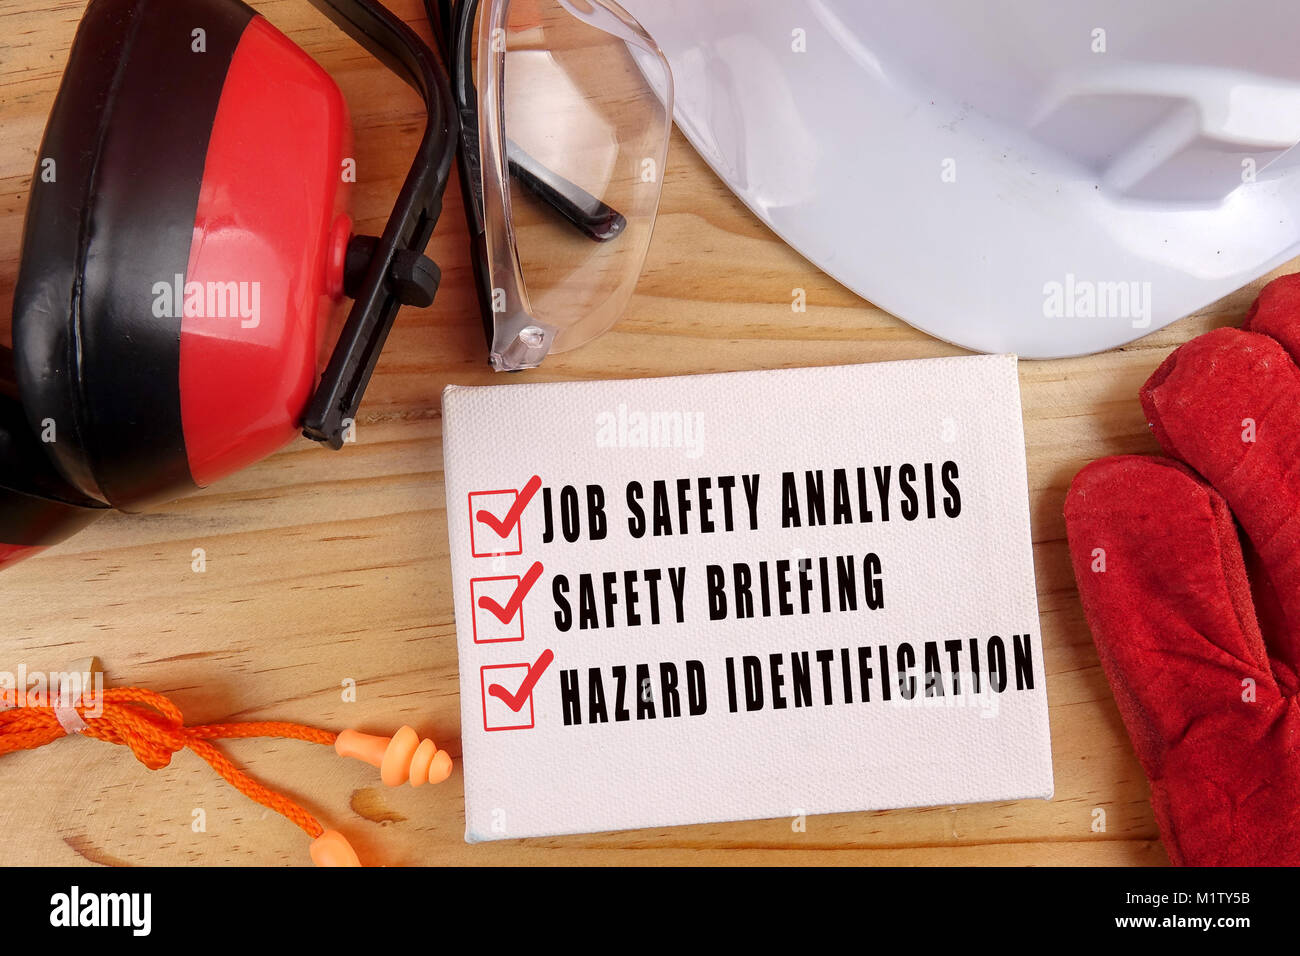 SAFETY AND HEALTH CONCEPT Stock Photo